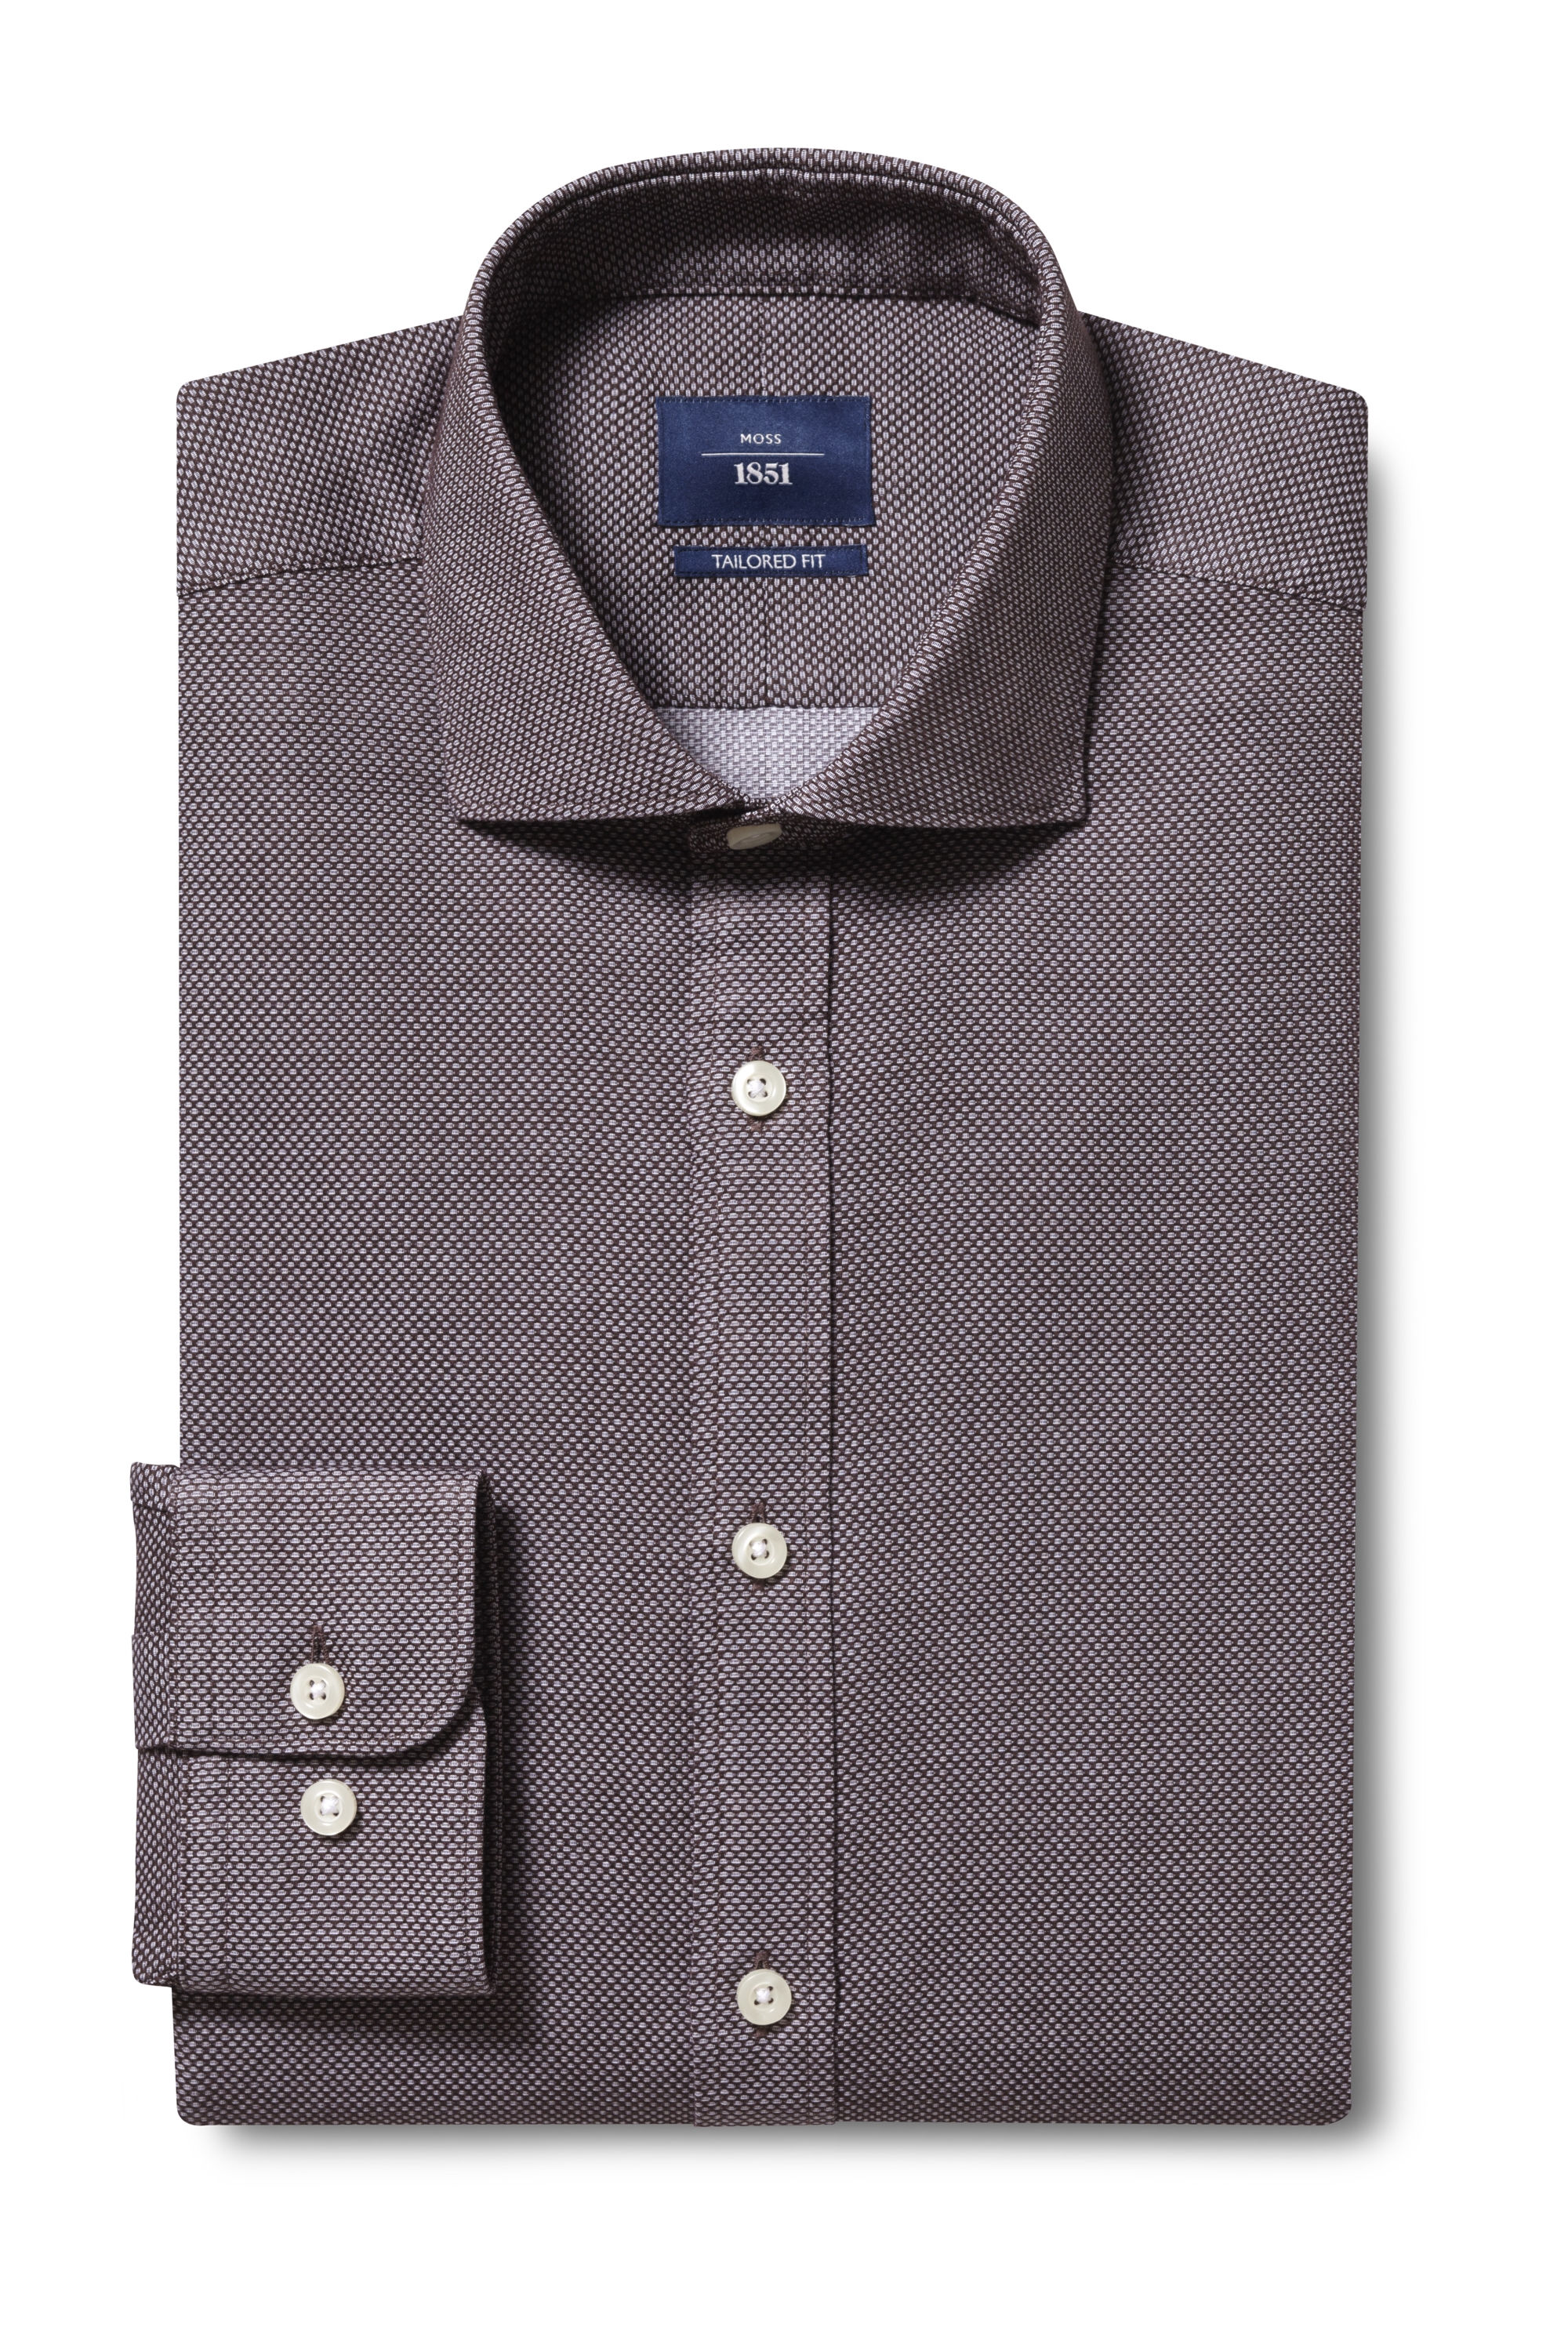 Moss 1851 Tailored Fit Brown Single Cuff Textured Dobby Shirt